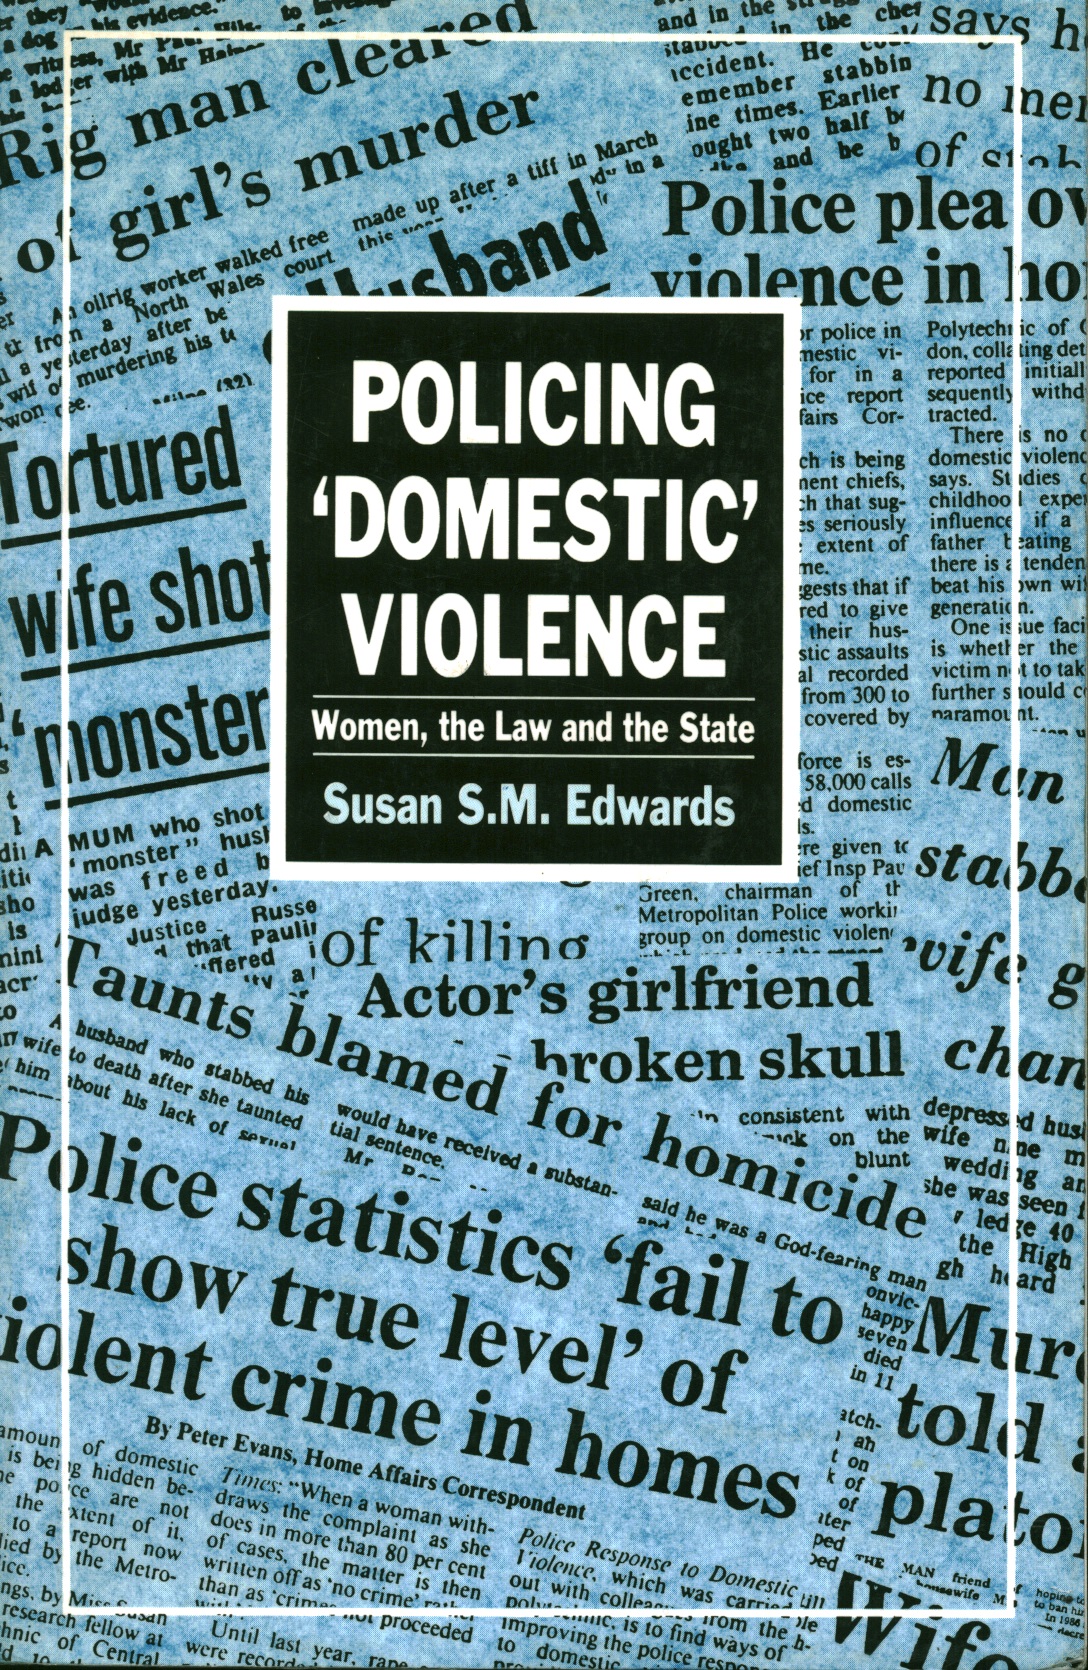 Policing, "domestic" violence. Women, the law and the state